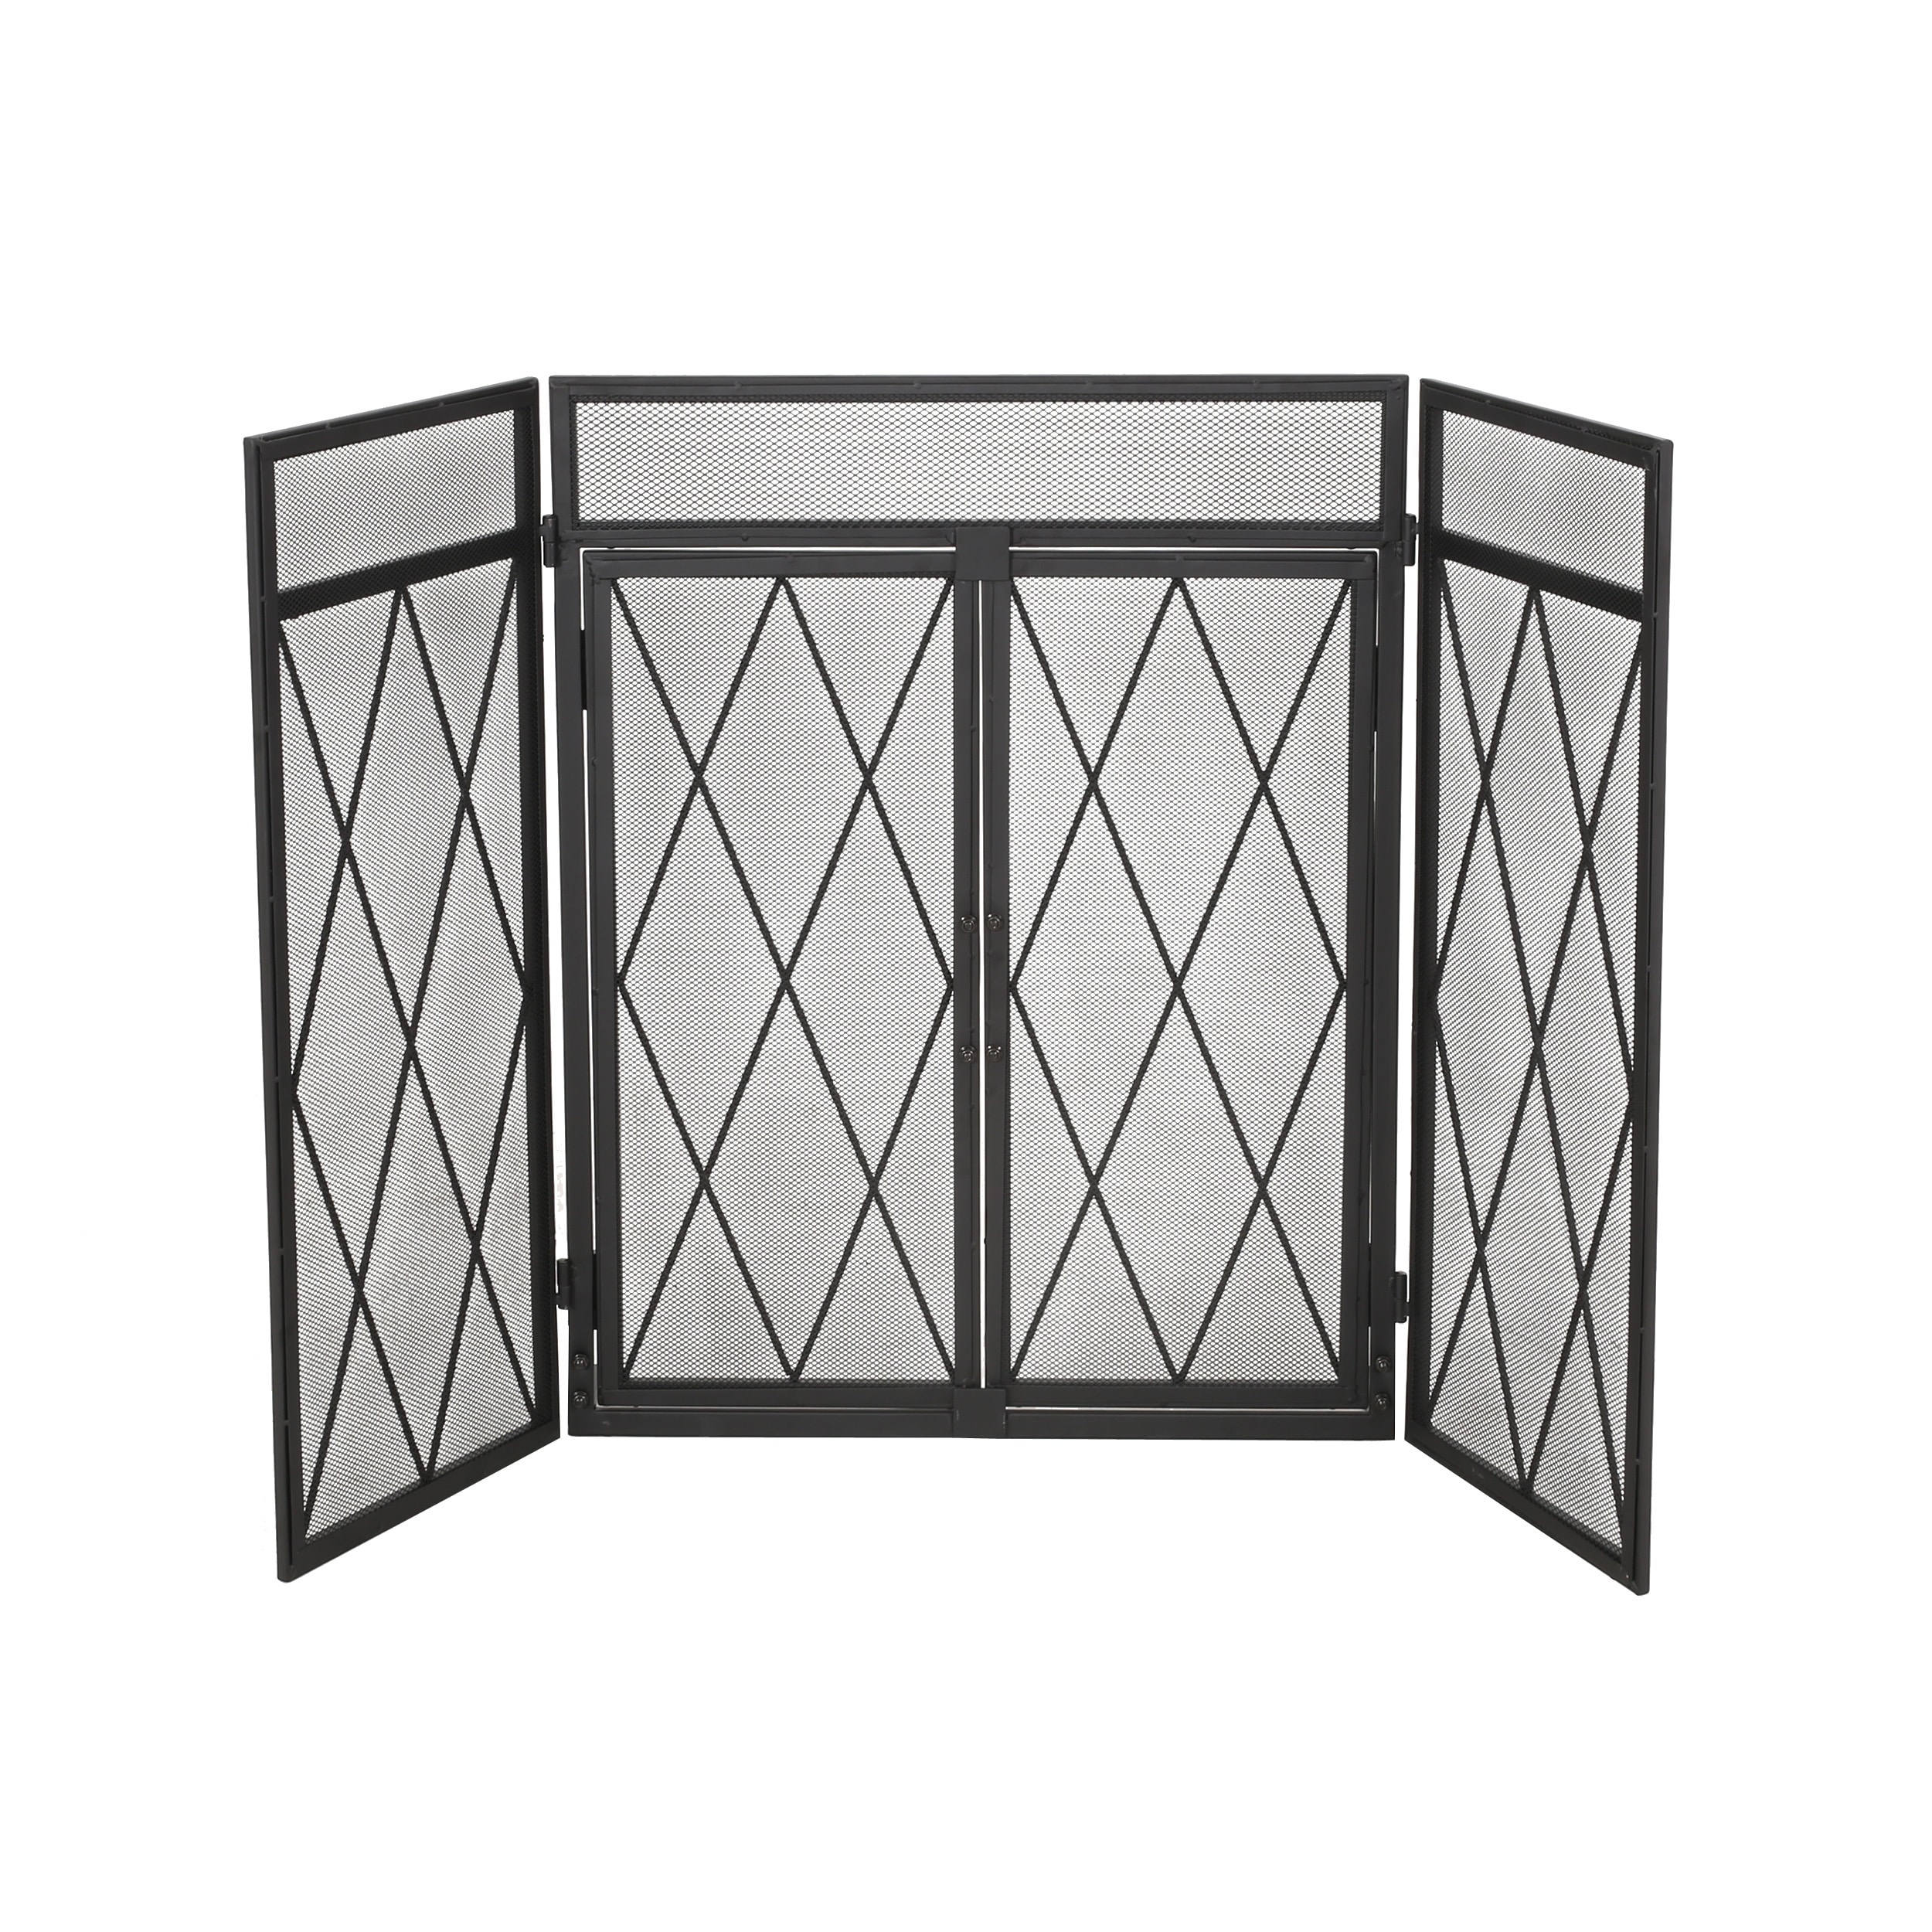 Christopher Knight Home Amiyah Panelled Iron Fireplace Screen, Gold - 5